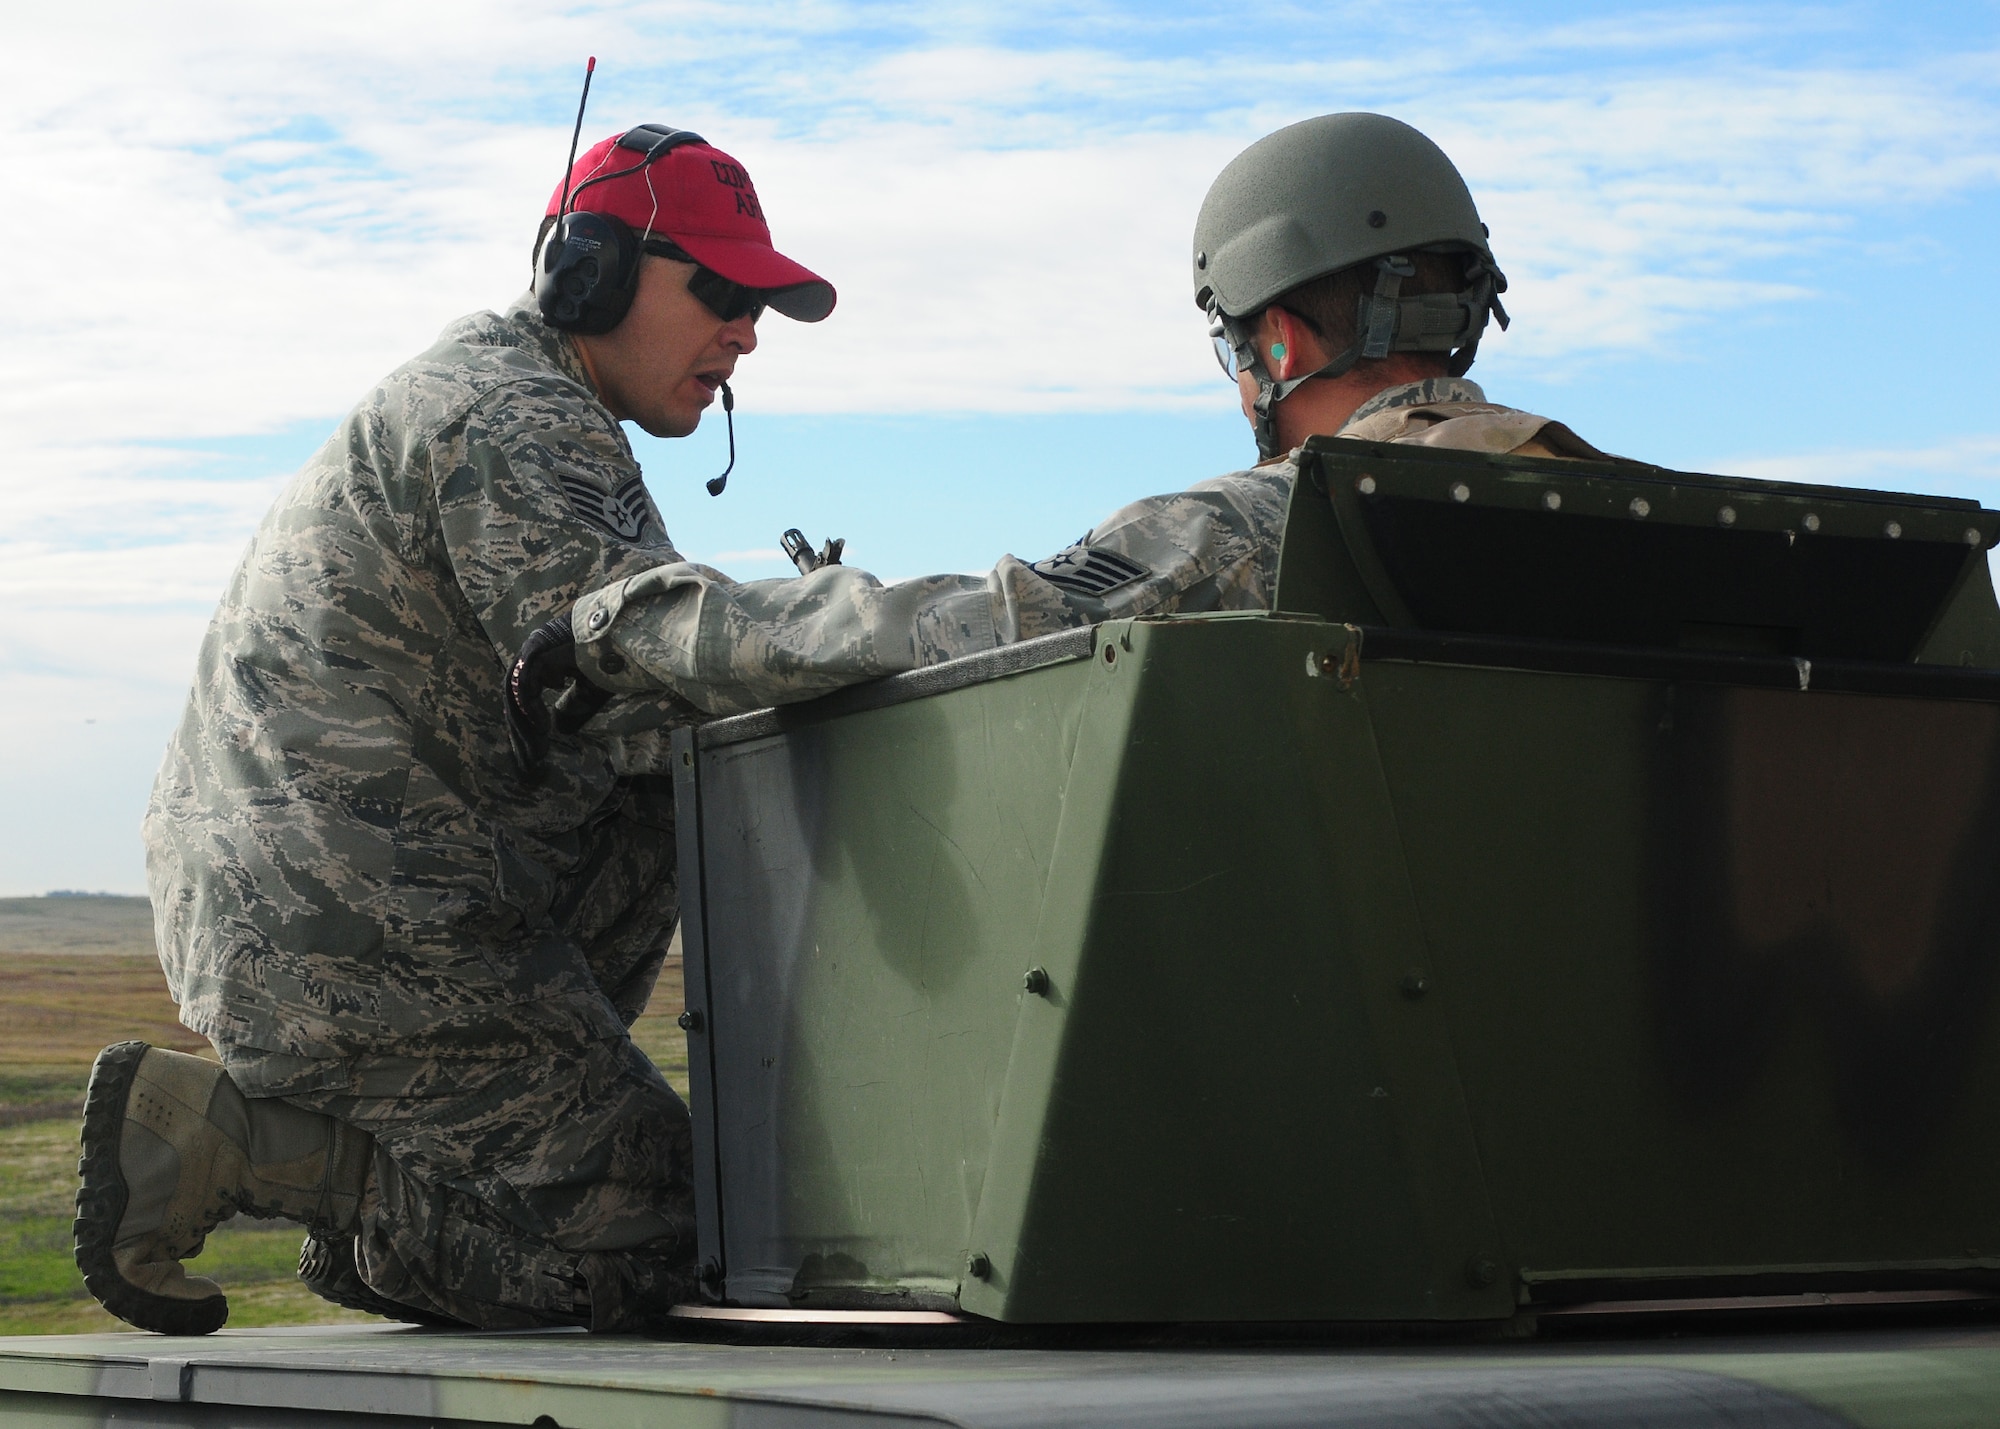 Staff Sgt. Angel Madrigal (left), 9th Security Forces Squadron combat arms instructor, informs Staff Sgt. Jay Weber, 9th Munitions Squadron munitions inspector, how to operate the M-240B light machine gun while mounted to a Humvee at the heavy weapons range at Beale Air Force Base, Calif., Jan. 11, 2013. The M-240B can be fired from the ground or a Humvee. (U.S. Air Force photo by Senior Airman Allen Pollard/Released)